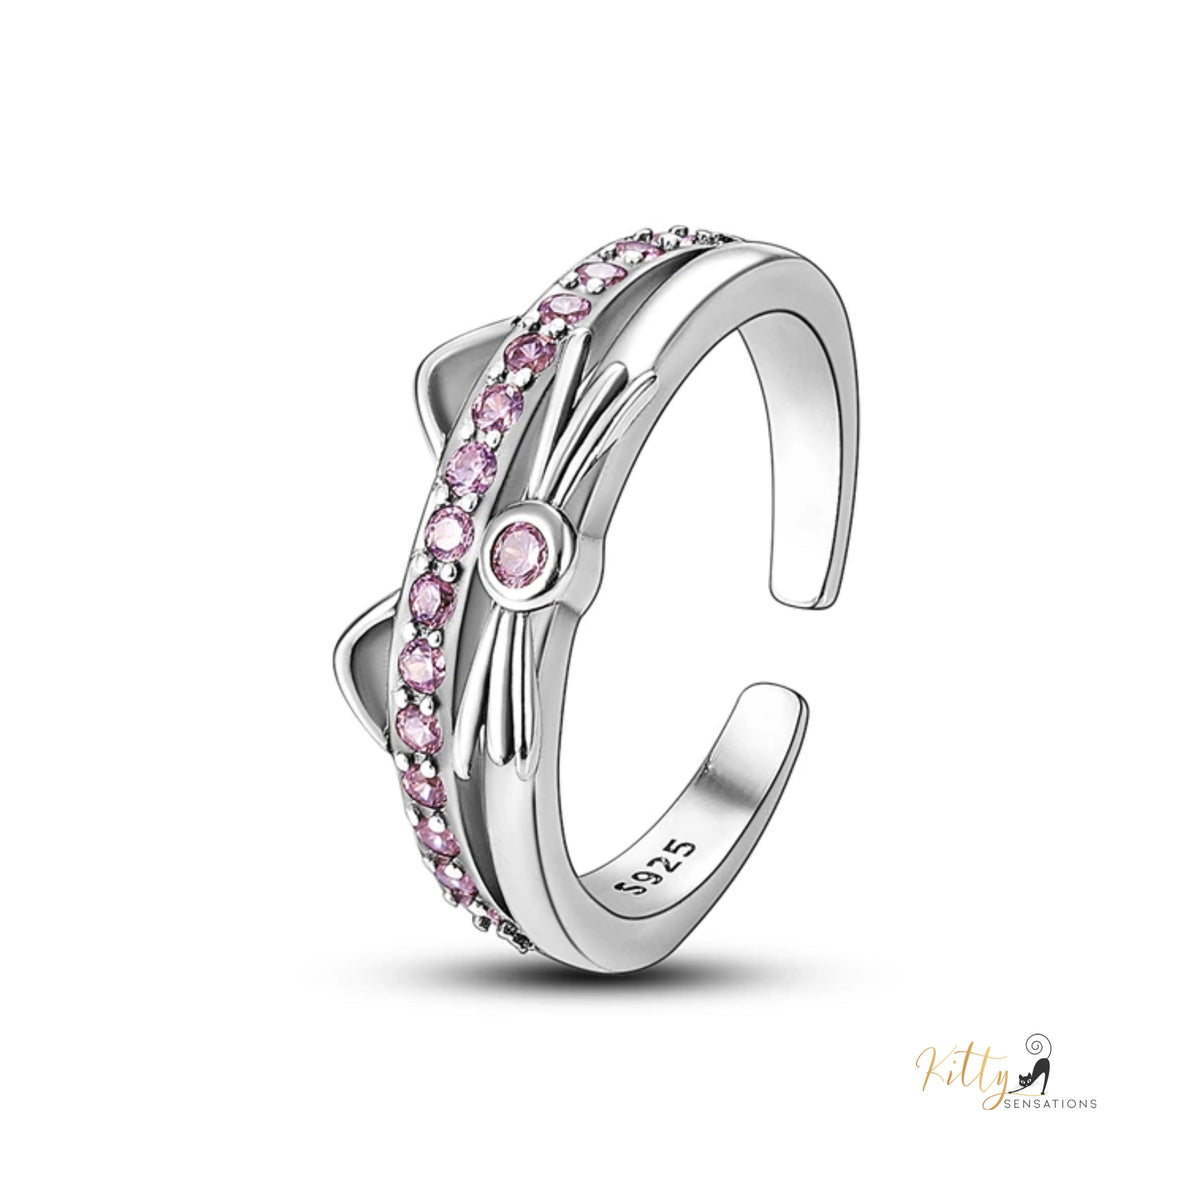 www.KittySensations.com: Kitty Face Ring with Pink Cubic Zirconia in Solid 925 Sterling Silver - Adjustable Size ($25.97): https://www.kittysensations.com/products/kitty-face-ring-with-pink-cubic-zirconia-in-solid-925-sterling-silver